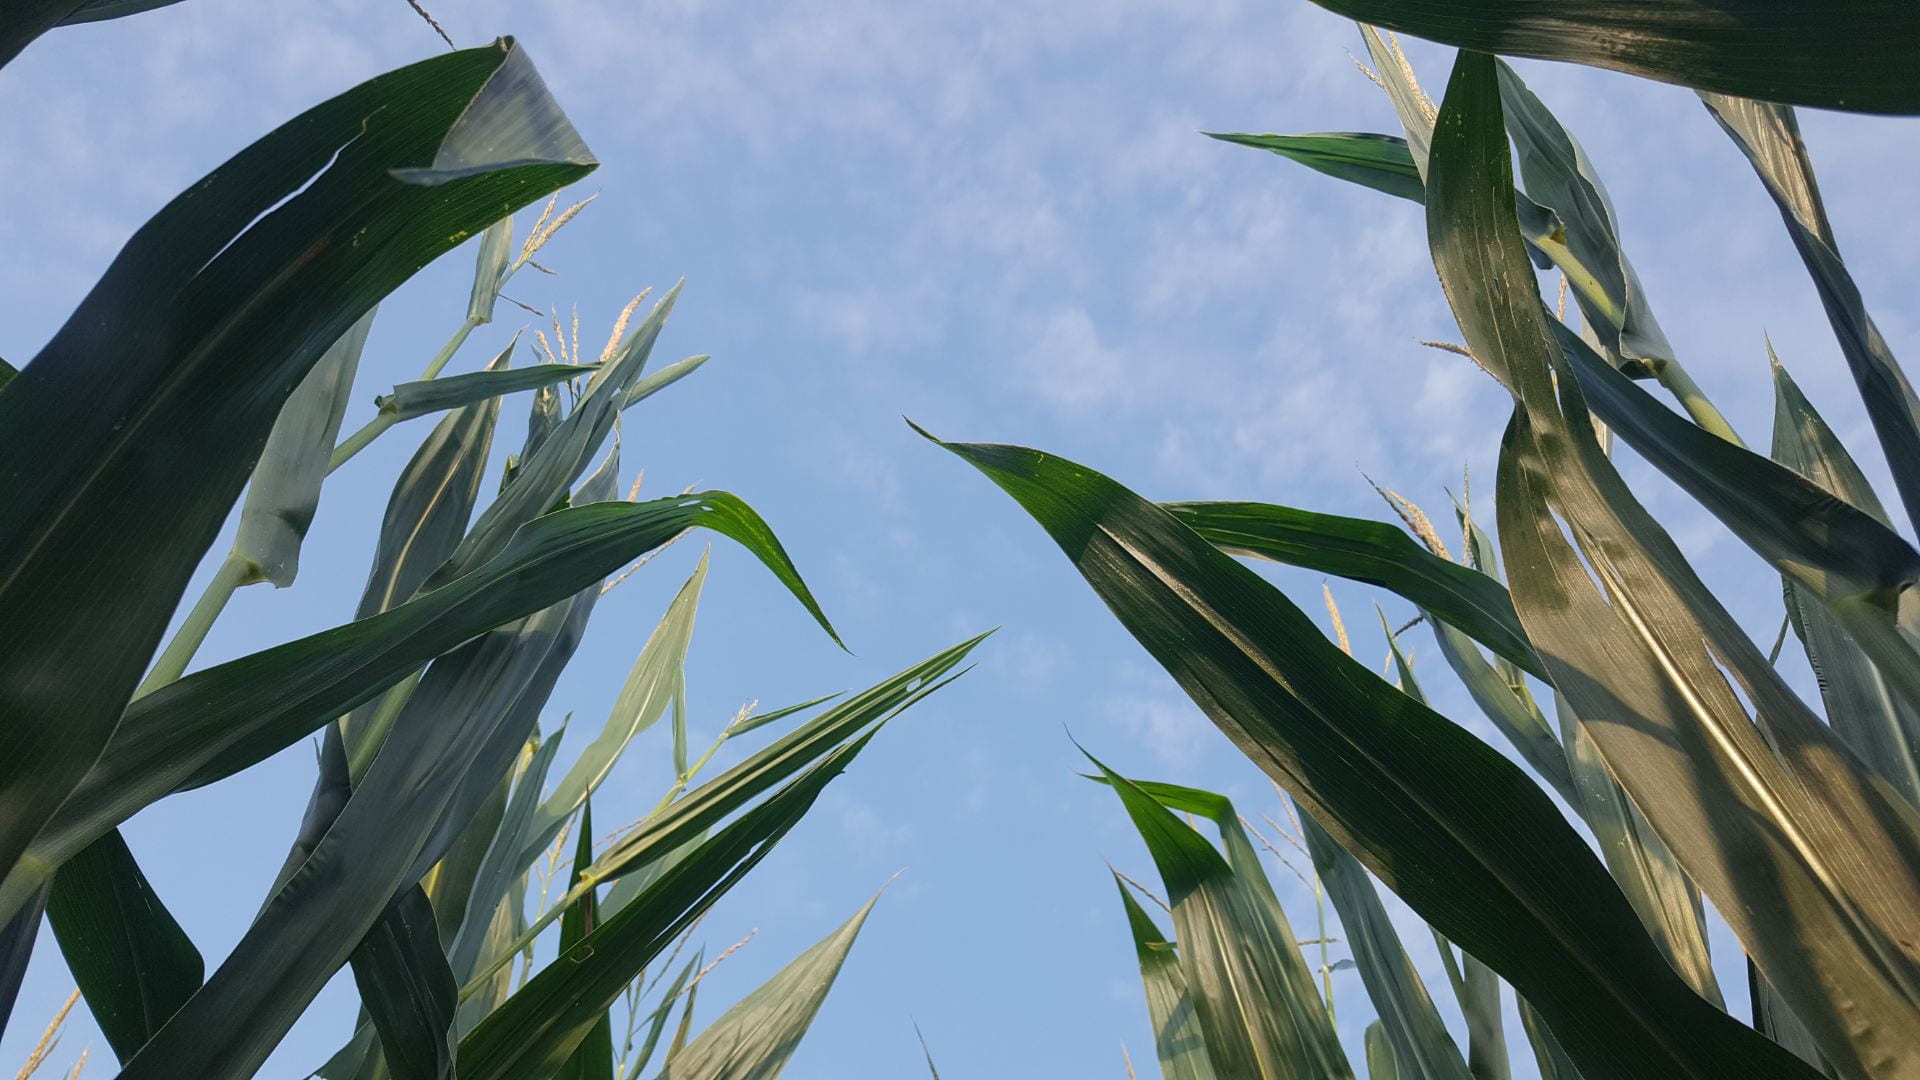 Corn leaves and tassels with blue skies in the background